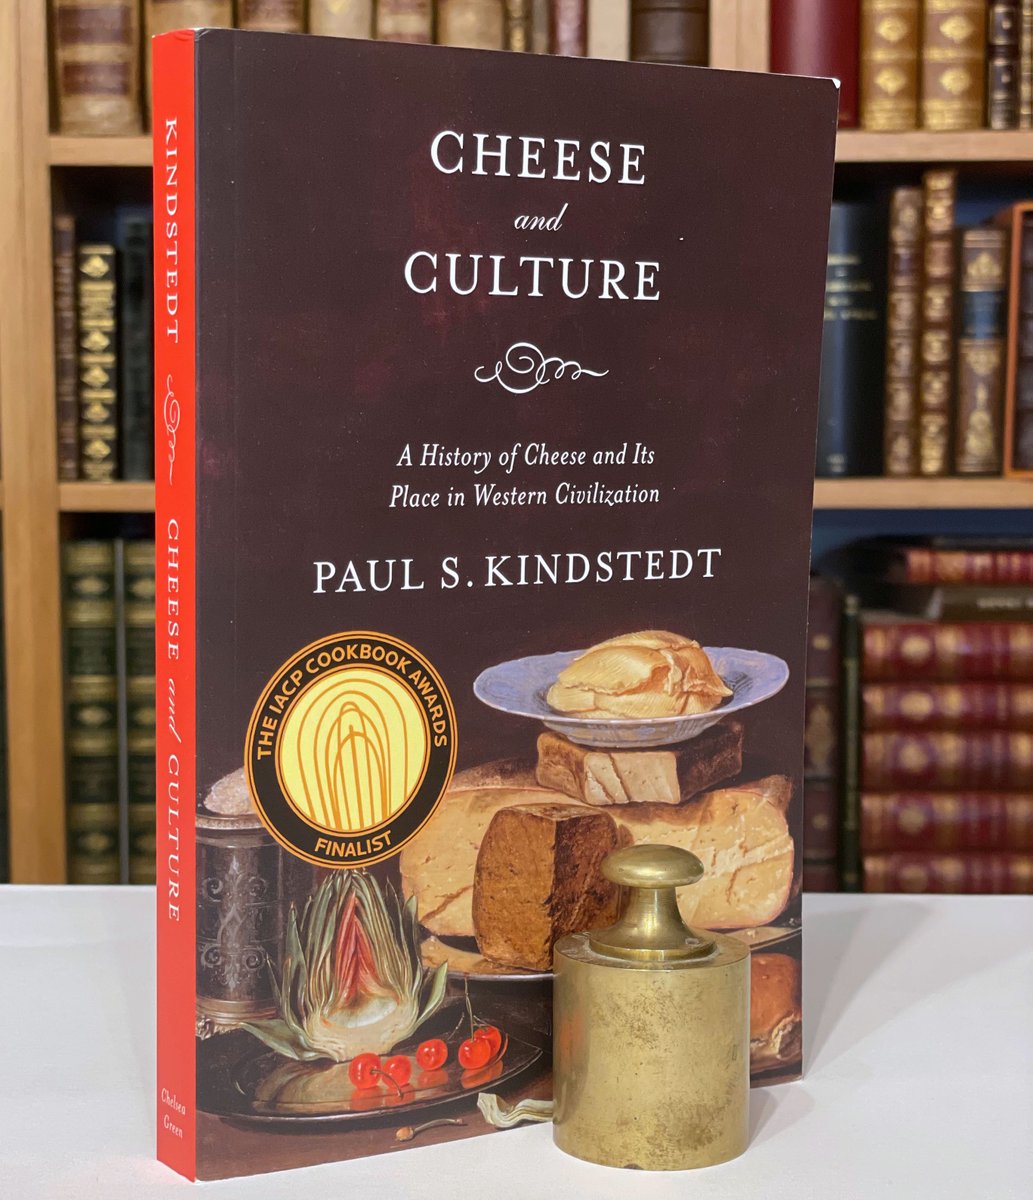 For more on the role cheese and cheesemaking has played in human civilization, from earliest antiquity through the Middle Ages and into the modern era, read Paul Kindstedt's excellent "Cheese and Culture".   49/